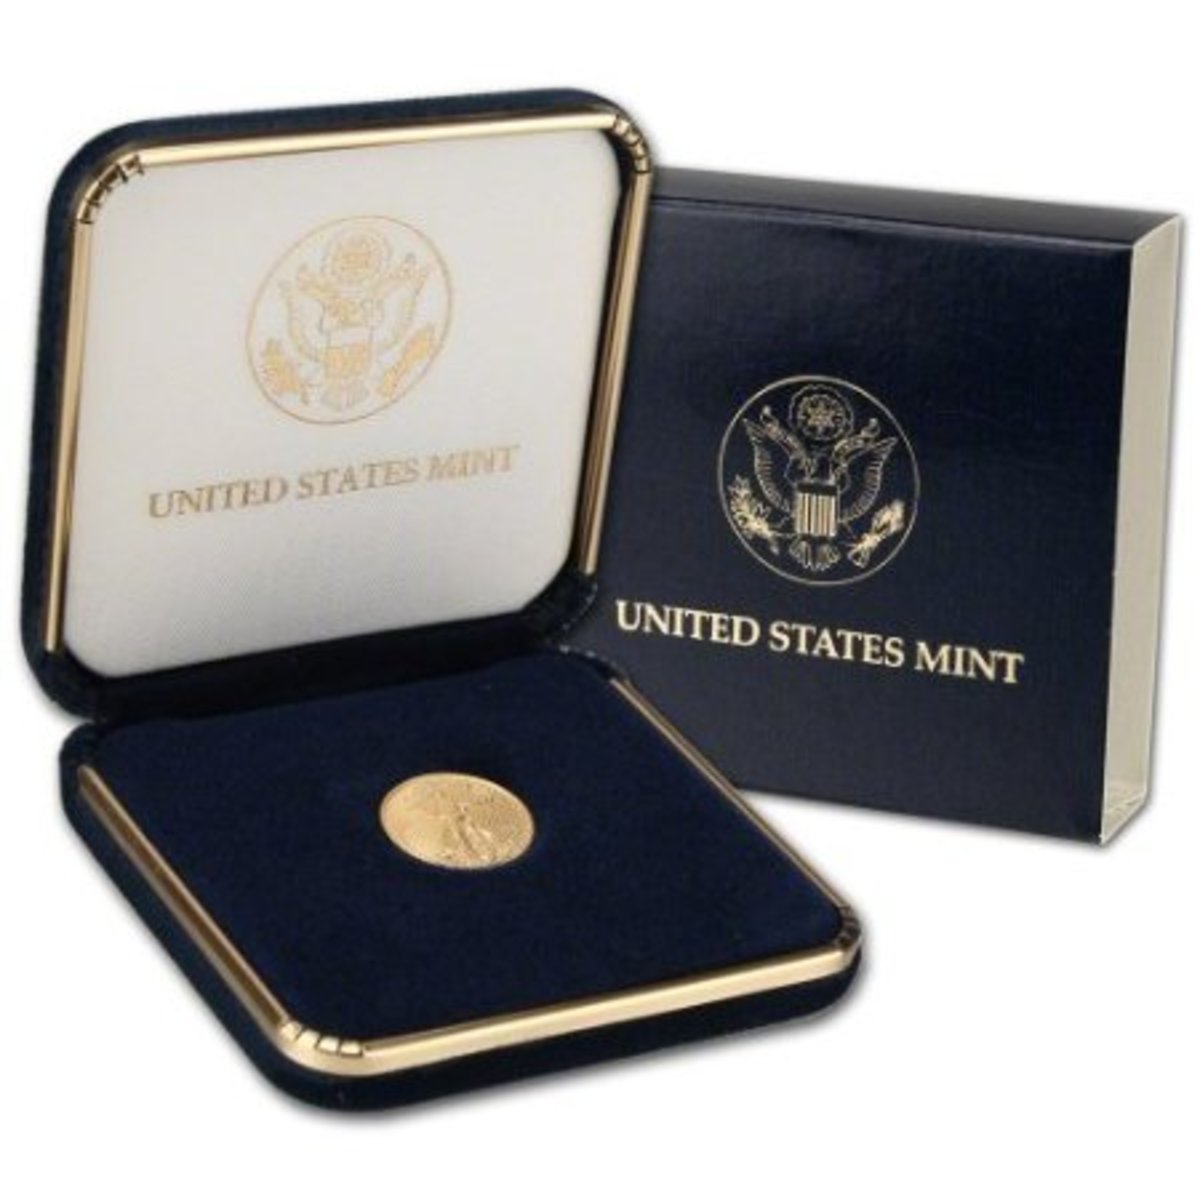 $5 Mint Gold Coin Gift